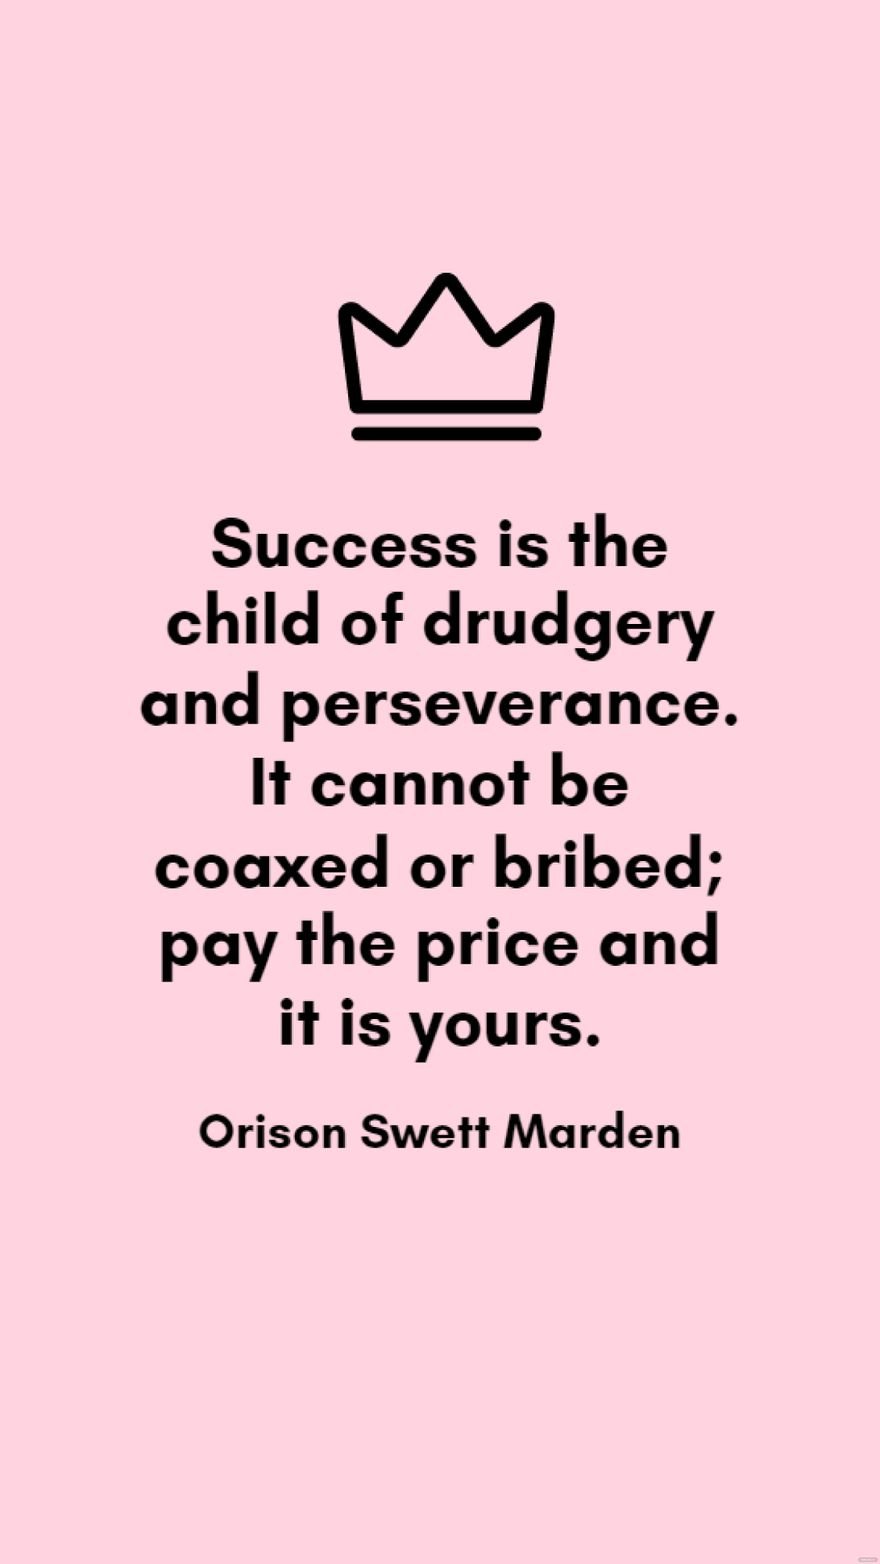 Free Orison Swett Marden - Success is the child of drudgery and perseverance. It cannot be coaxed or bribed; pay the price and it is yours.